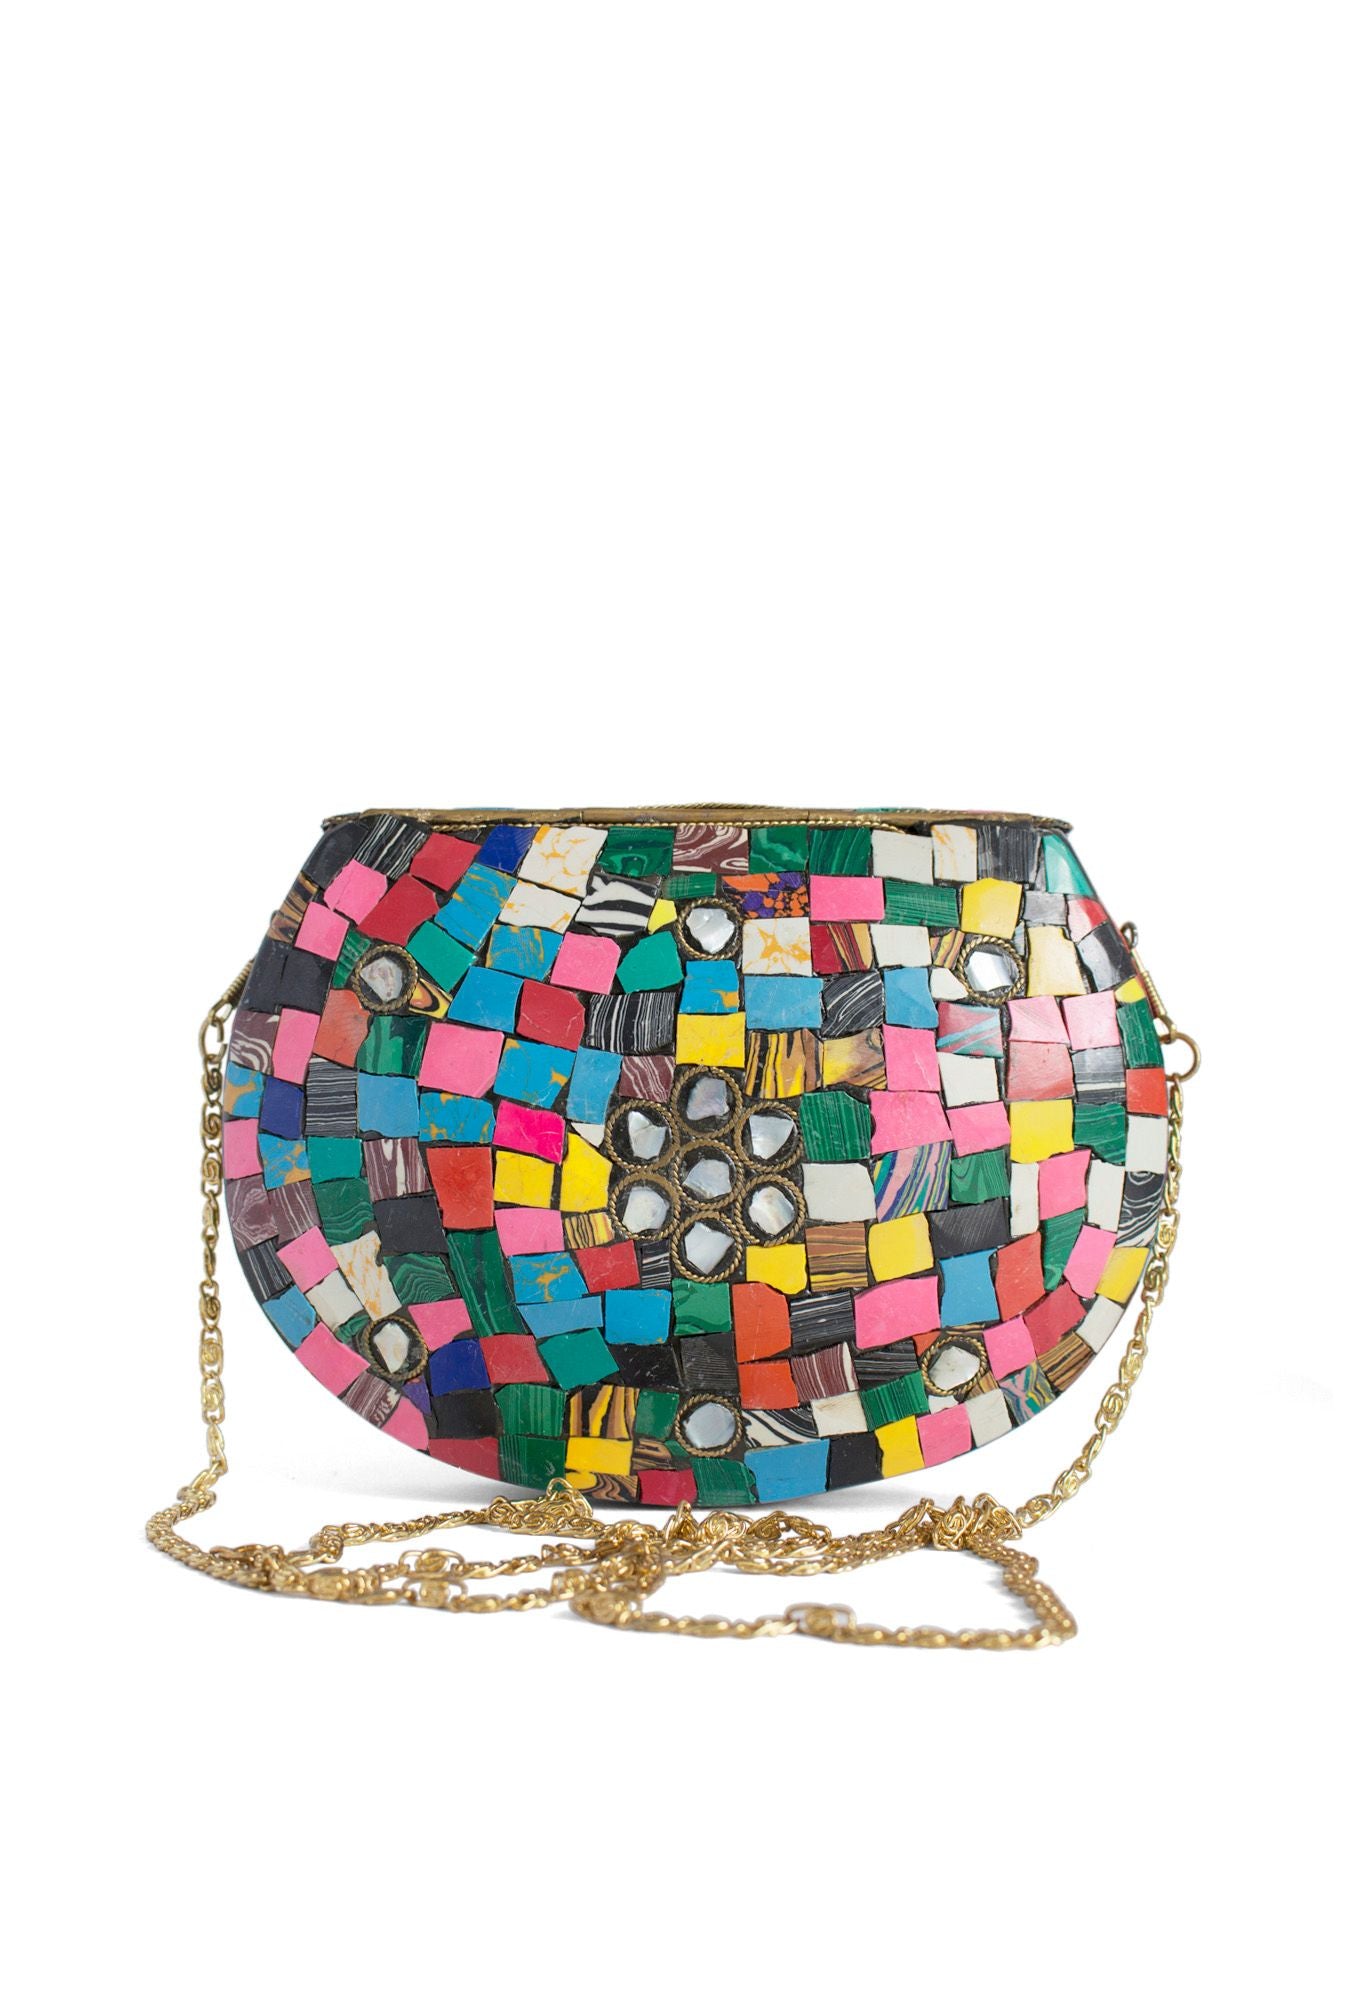 Quirky Vintage Clutch with Multi-colored Stone Inlay